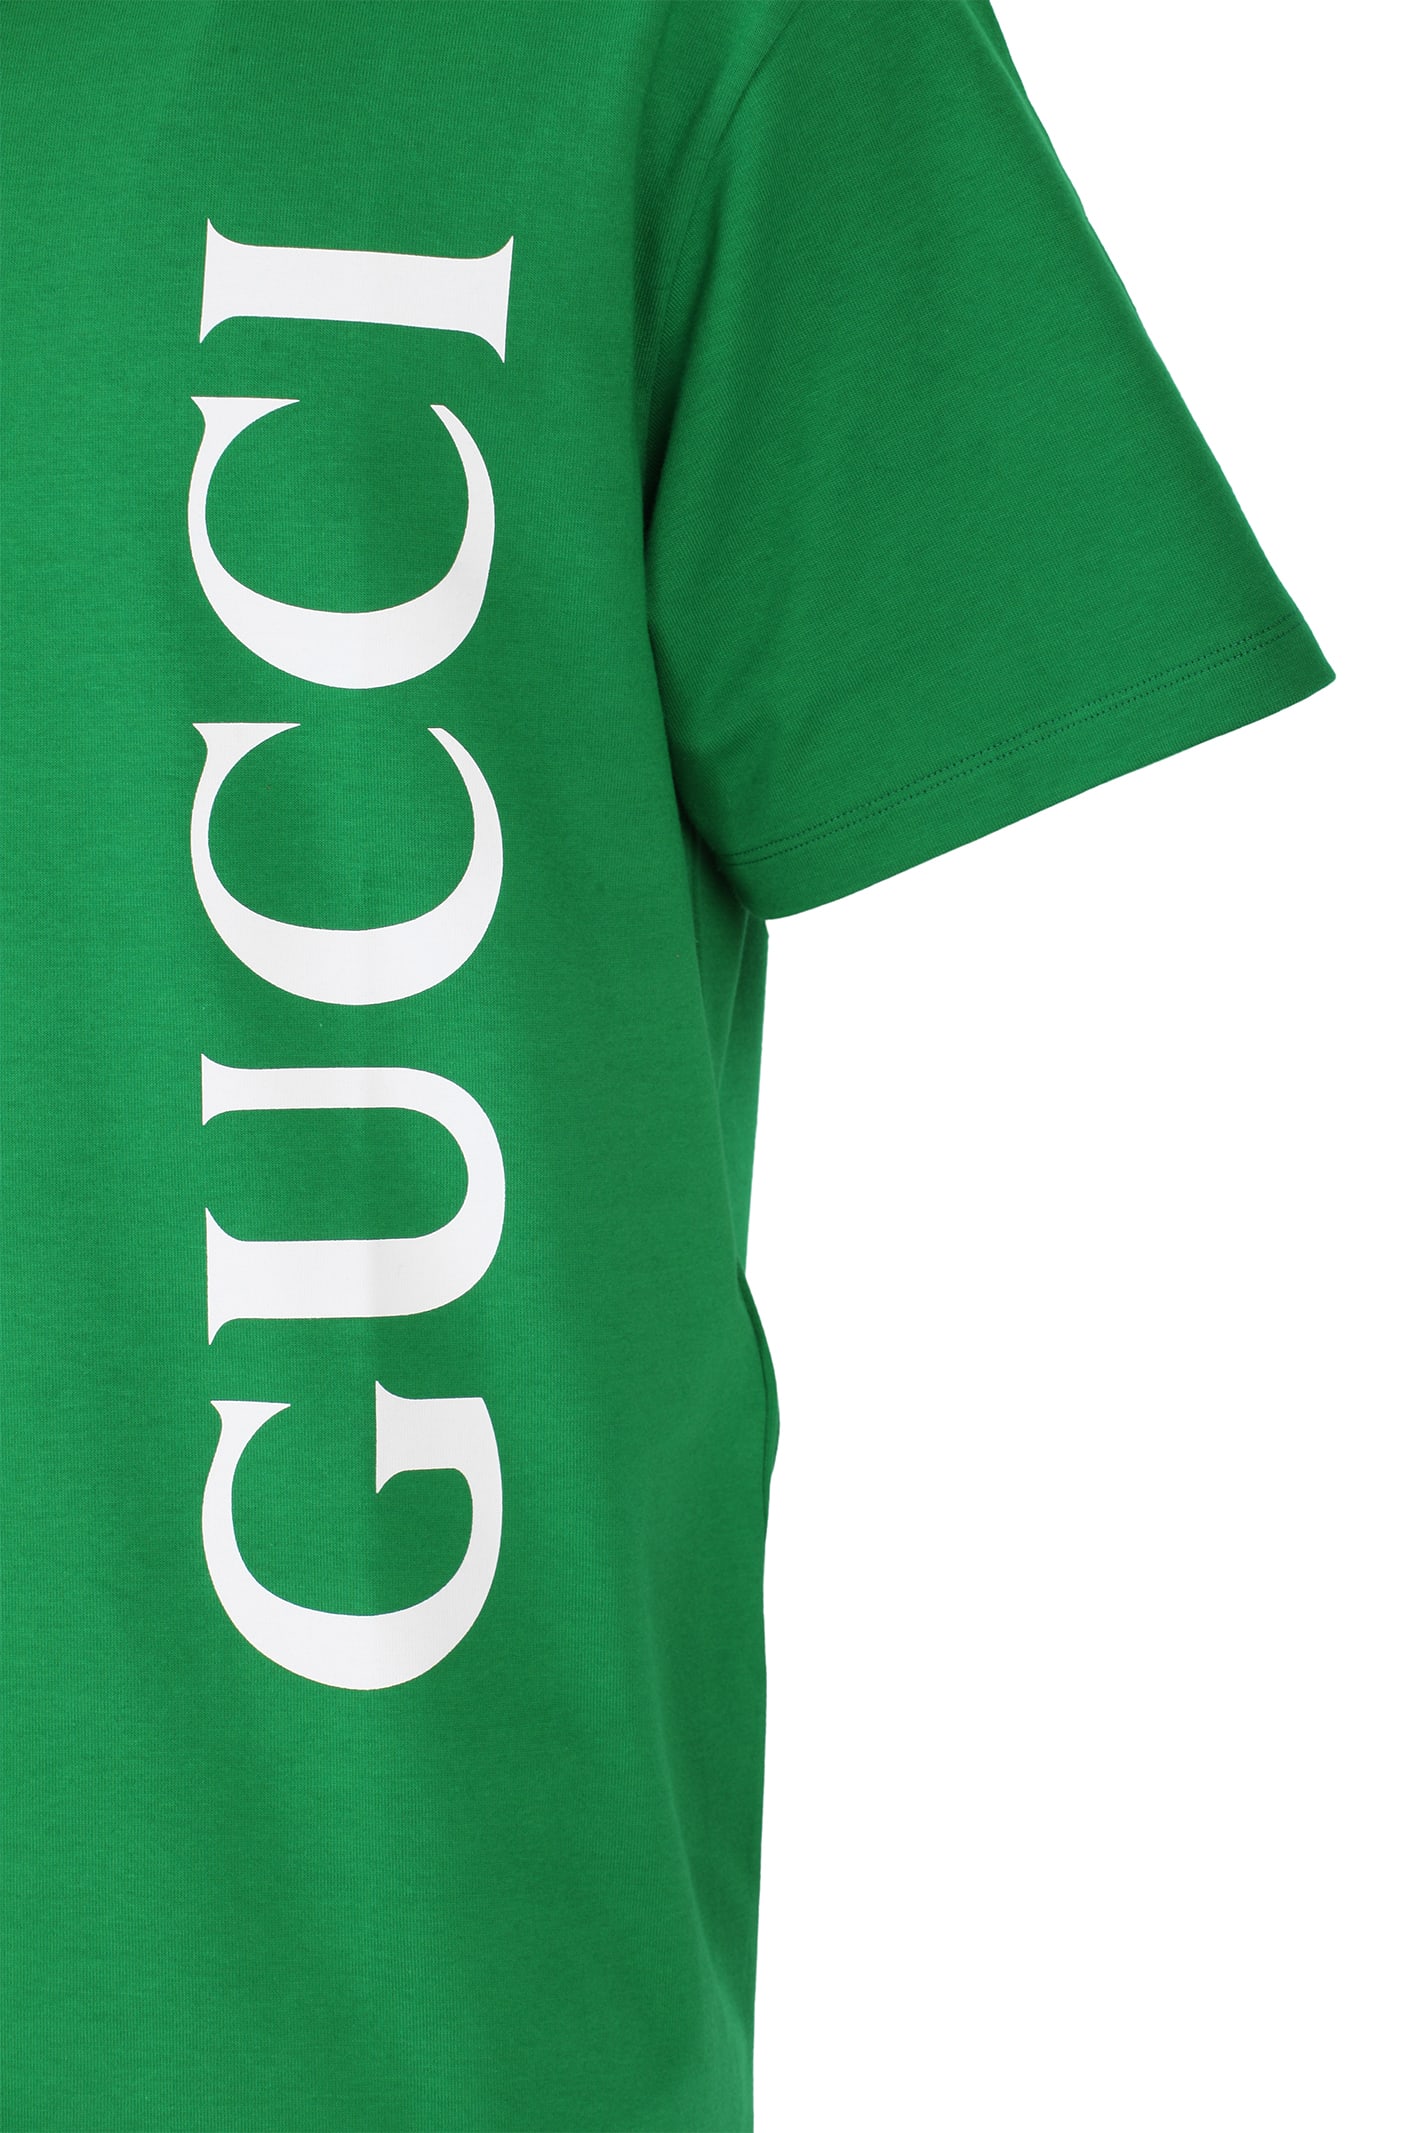 green gucci t shirt, OFF 78%,welcome to 